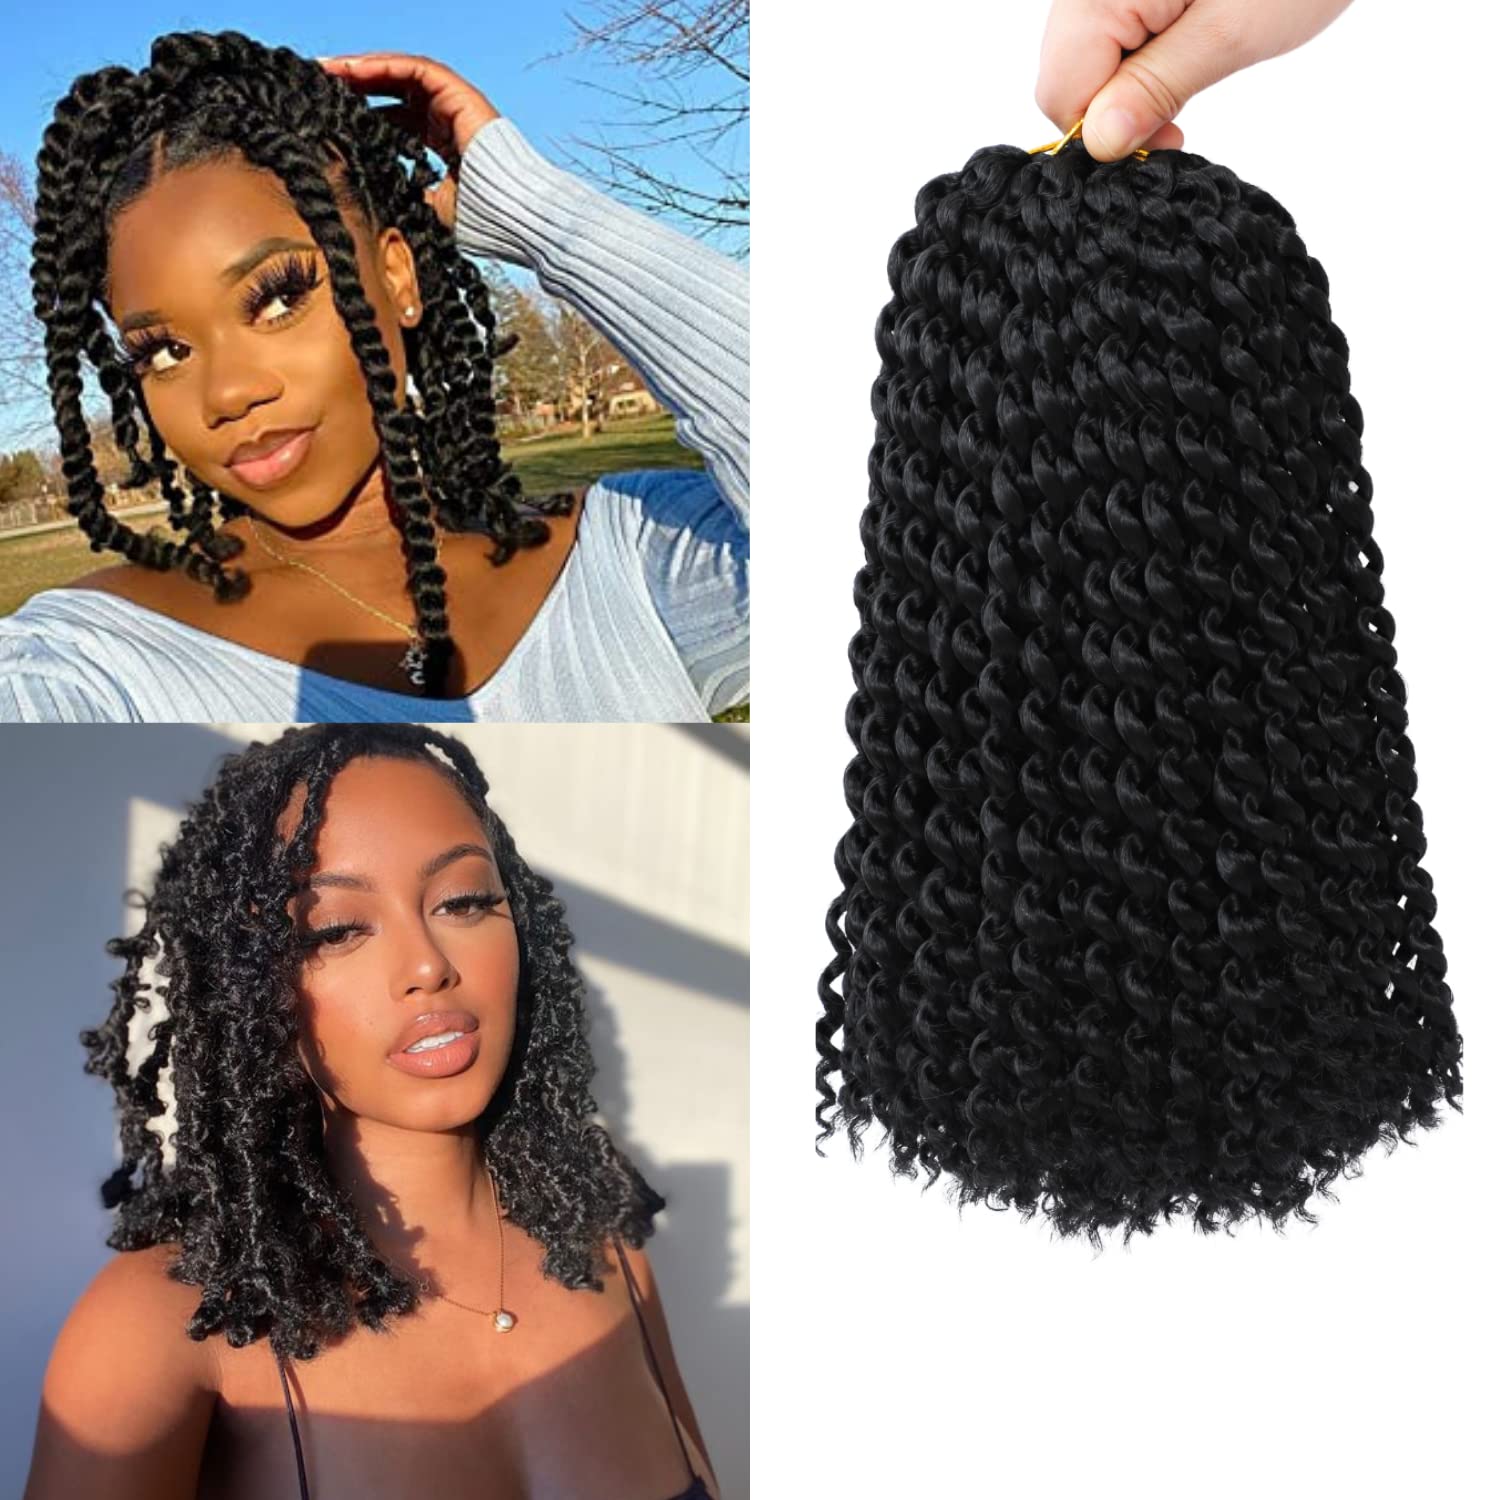 Short Passion Twist Hair,10 Inch Water Wave Crochet Hair 7 Packs Passion Twist  Crochet Hair For Women Natural Black Bohemian Synthetic Curly Braiding Hair  Extensions(10in,1b)